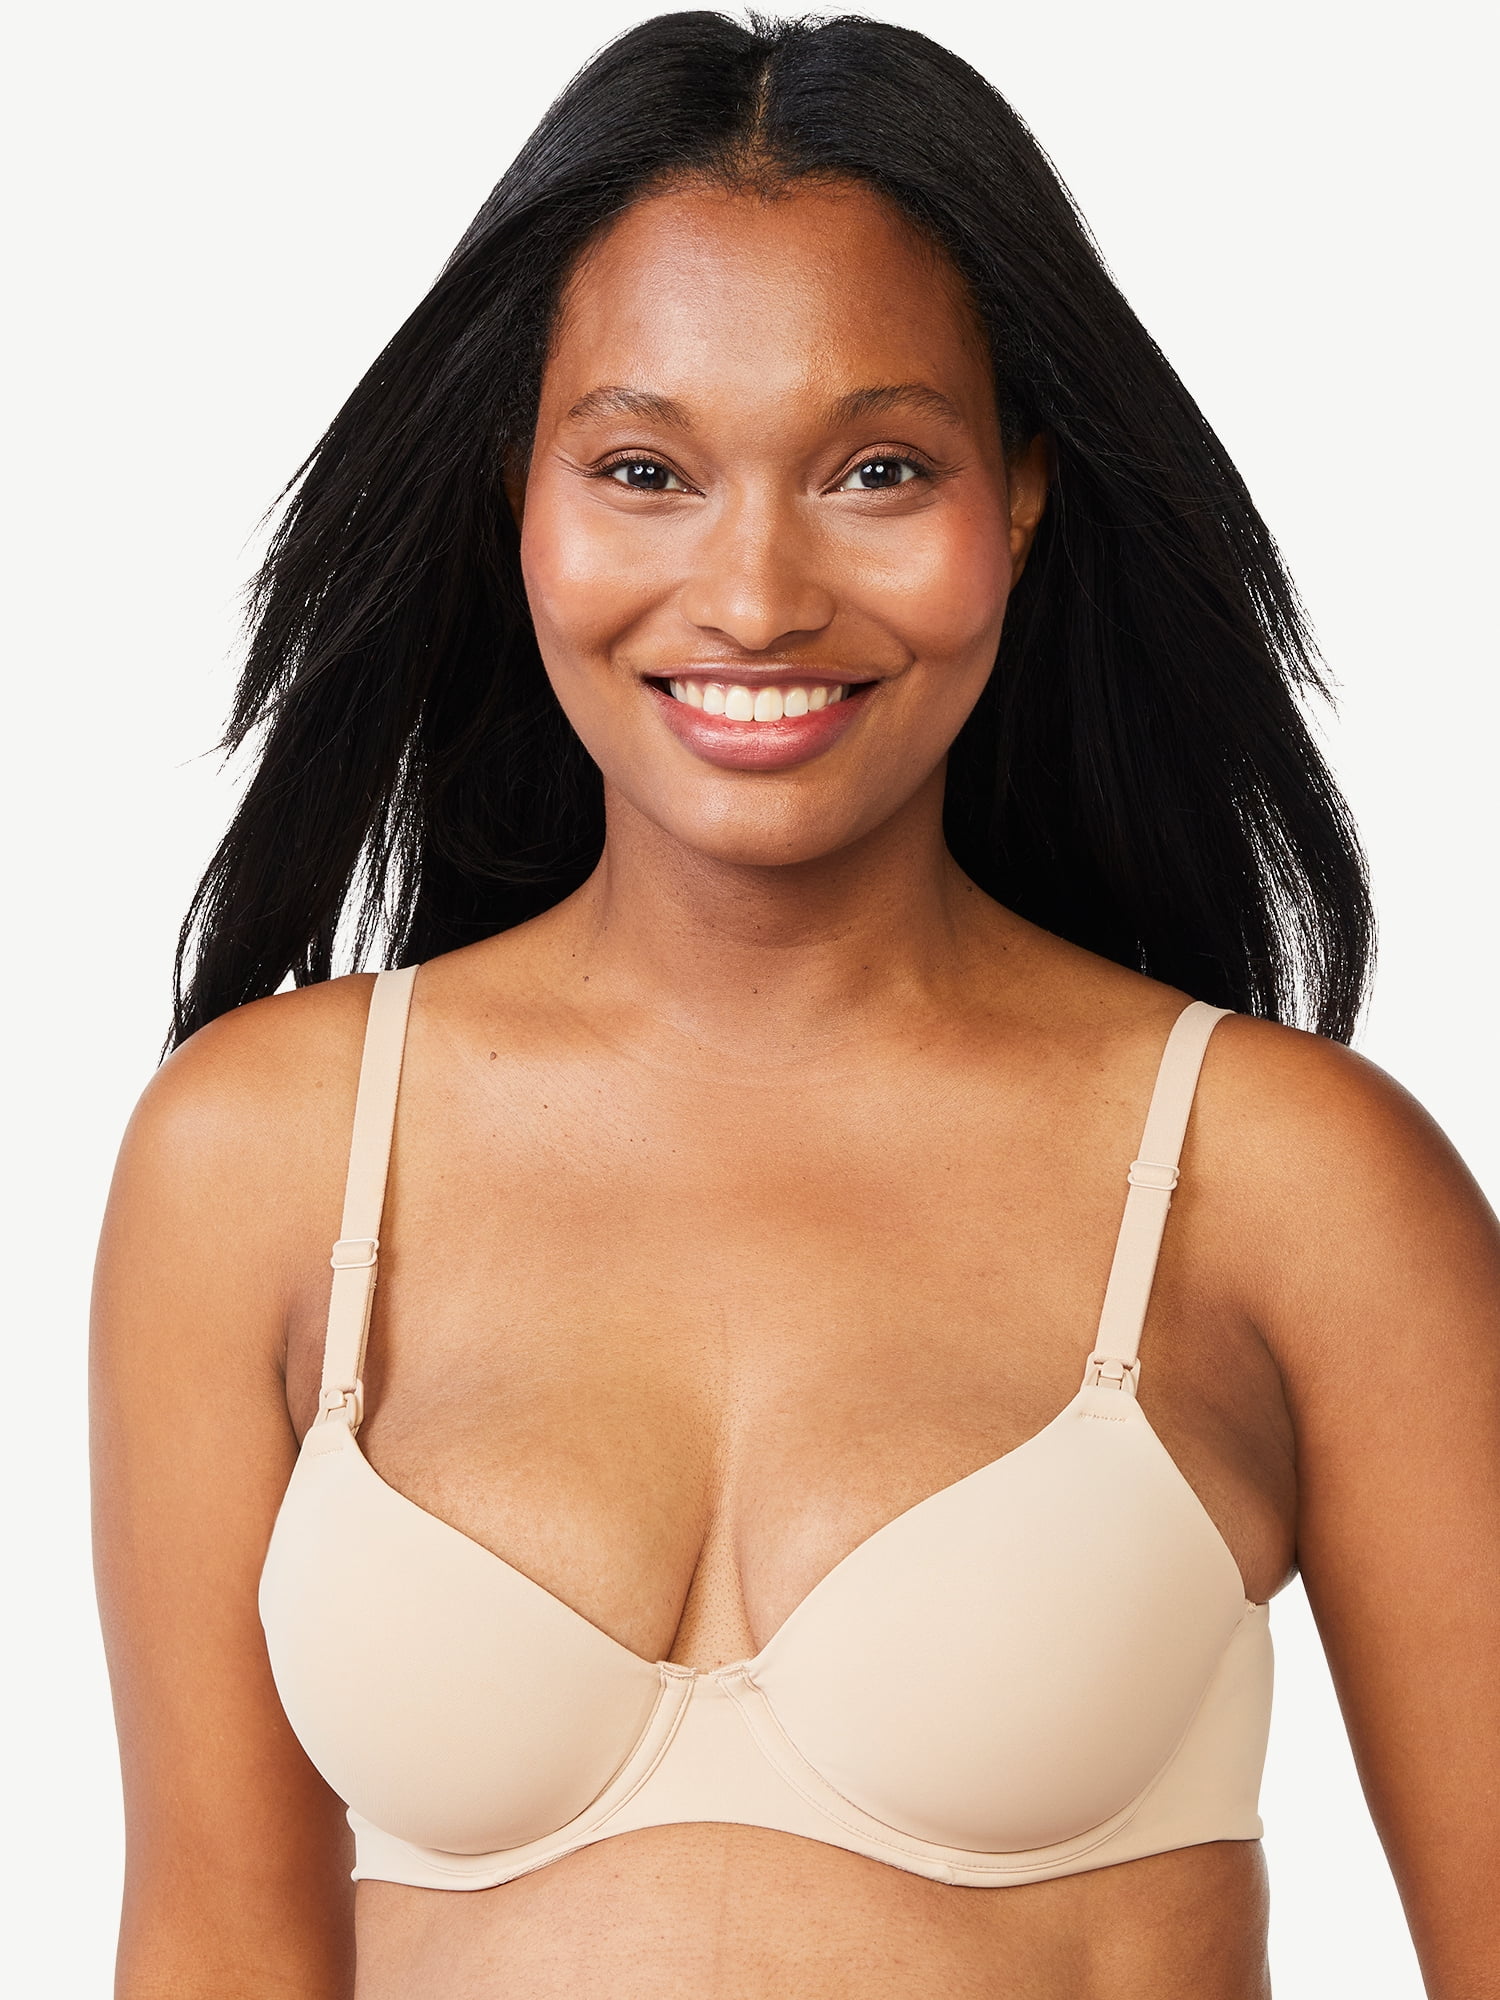 Where can I find bras that are in between sizes? 34B is too small